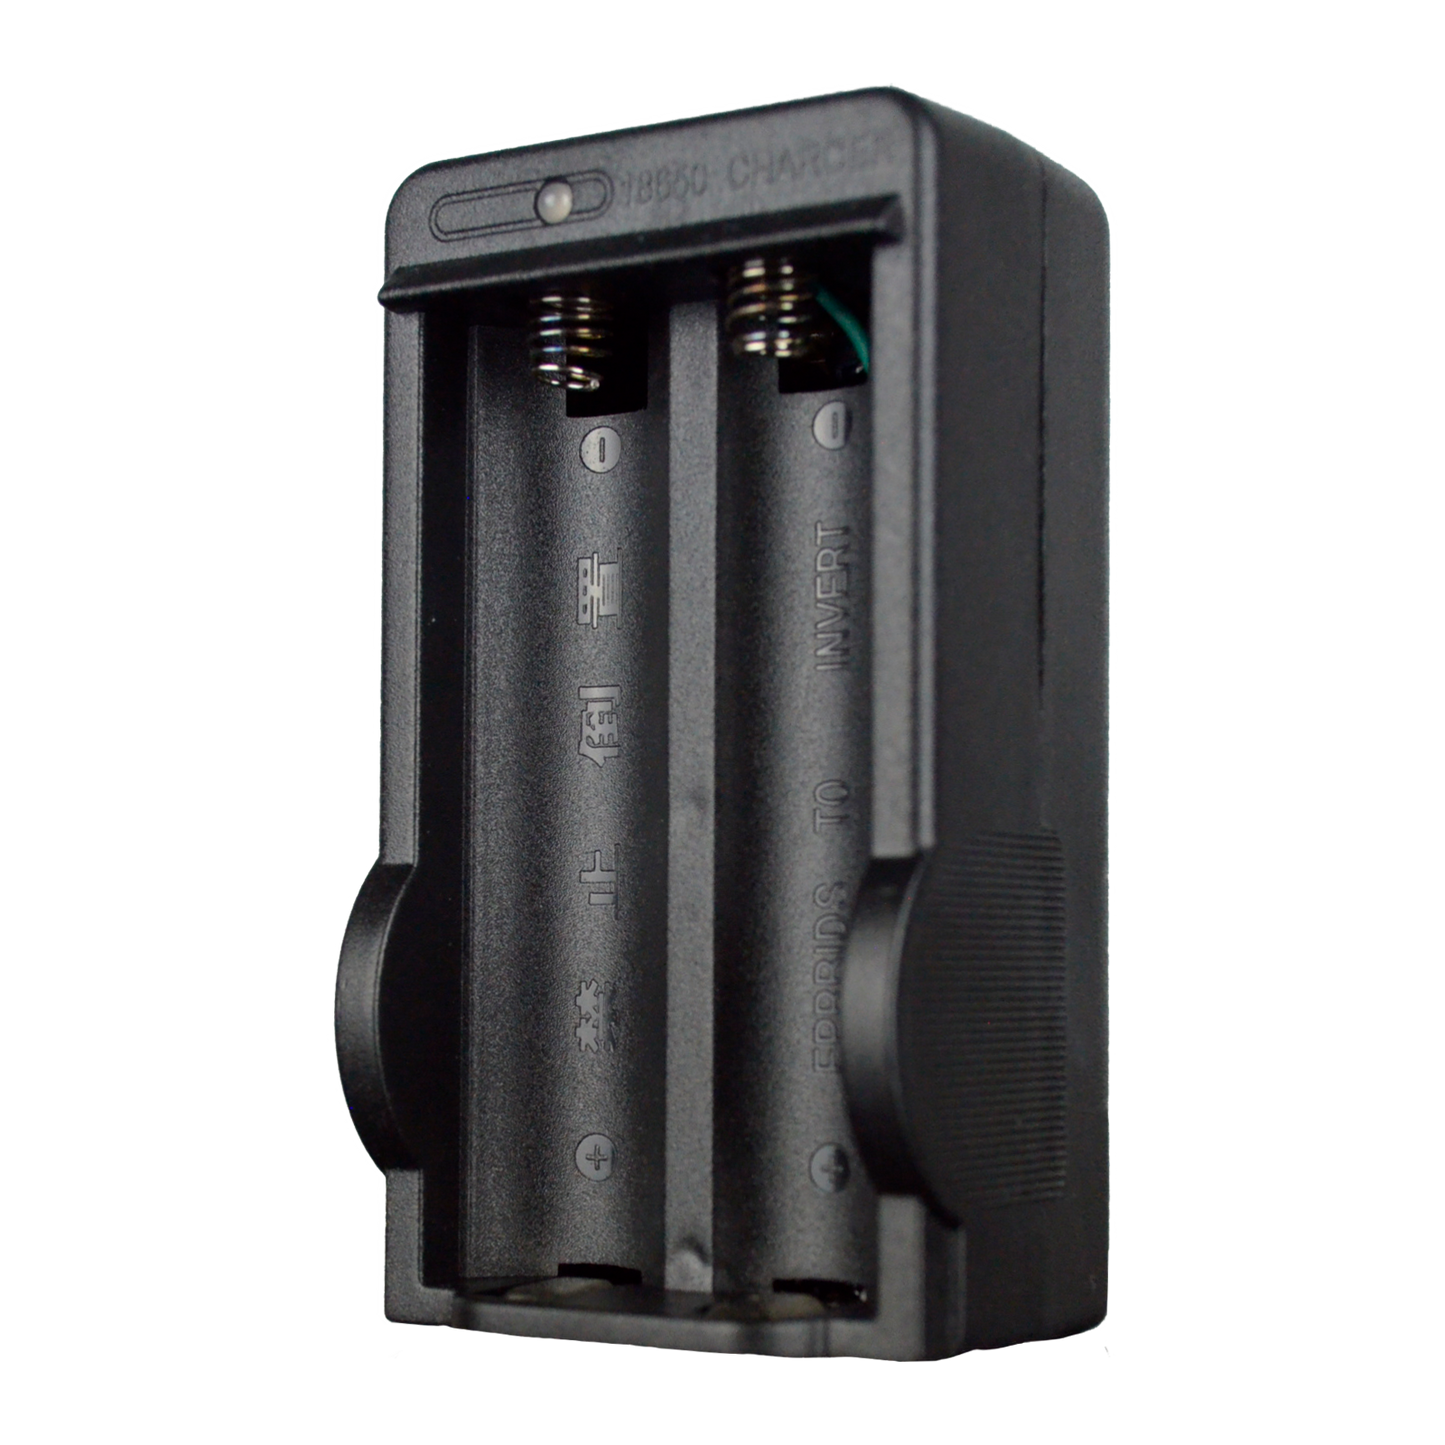 18650 Battery Charger for use with ImPro UHF Microphones Batteries